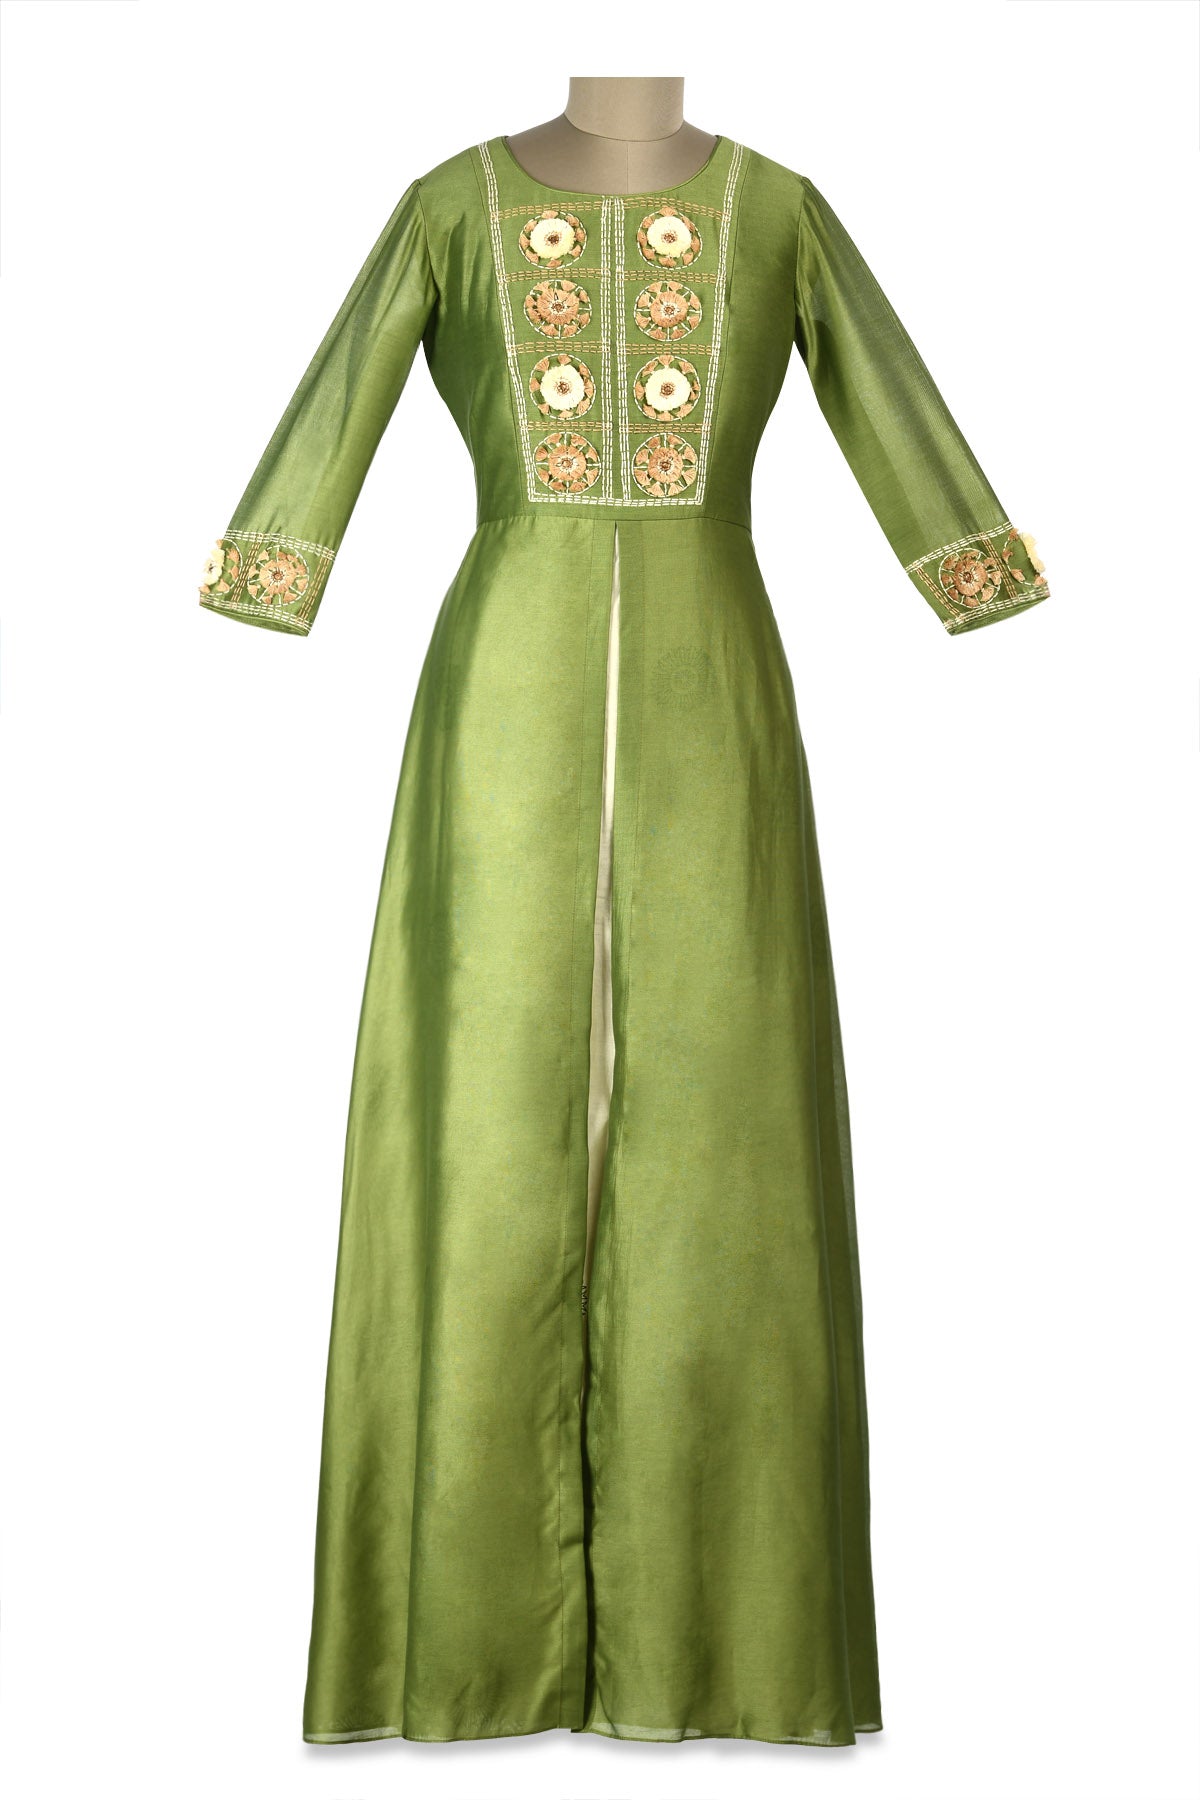 Buy stunning olive green embroidered layered chanderi Anarkali online in USA. Shine at weddings and special occasions with beautiful Indian designer Anarkali suits, traditional salwar suits, sharara suits, designer lehengas from Pure Elegance Indian clothing store in USA.-full view